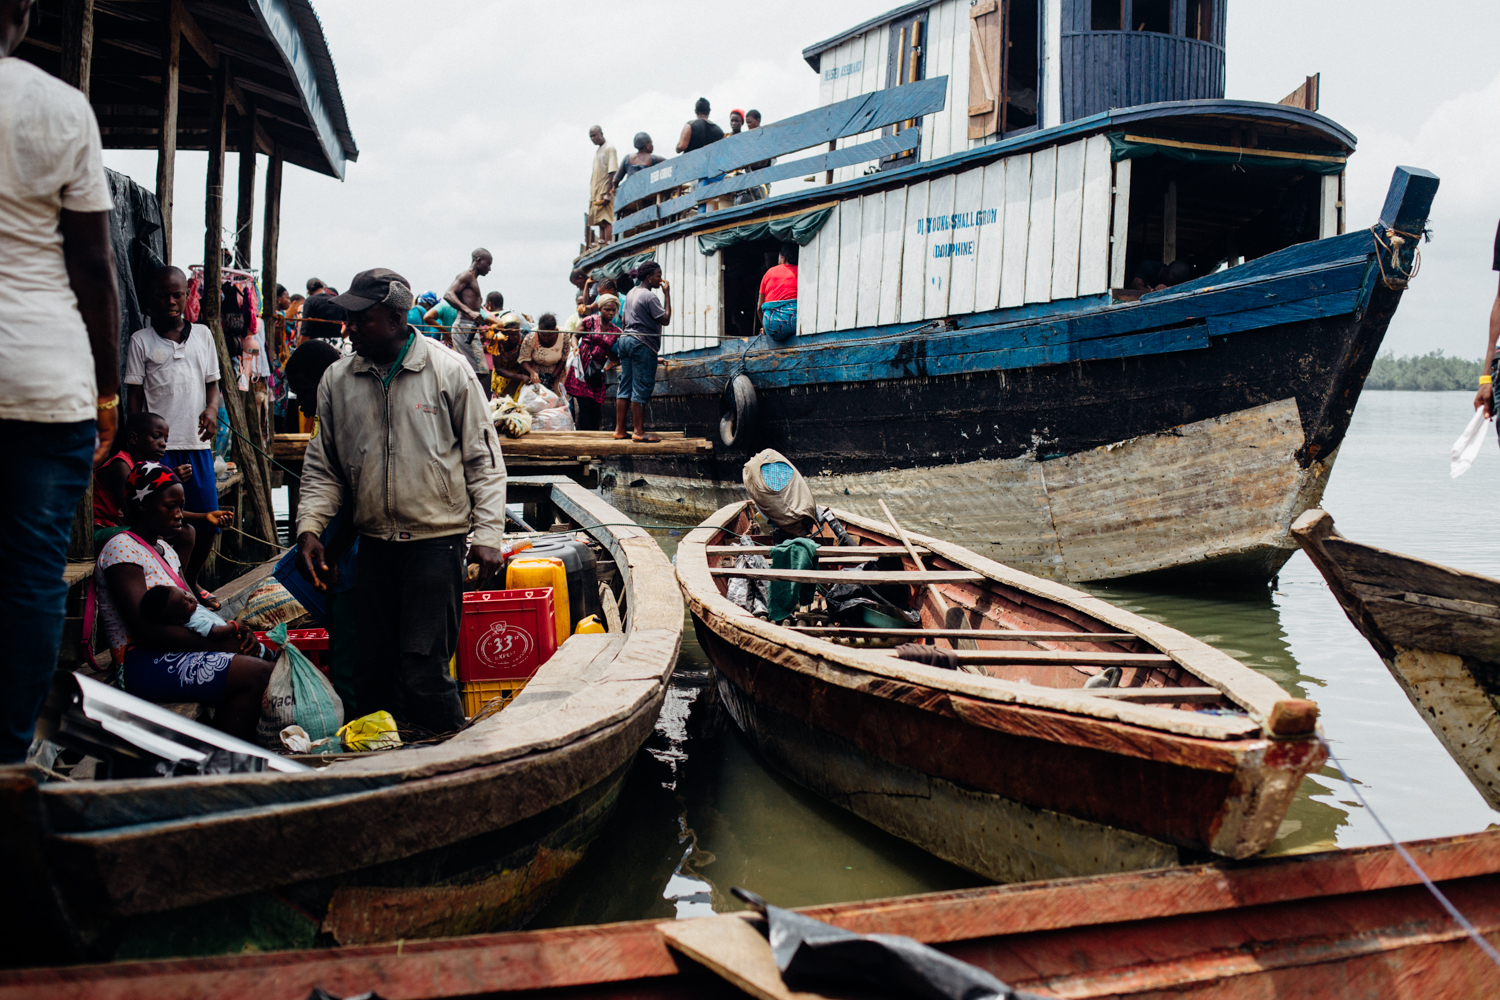 Boats at the floating market in Koko, Niger Delta